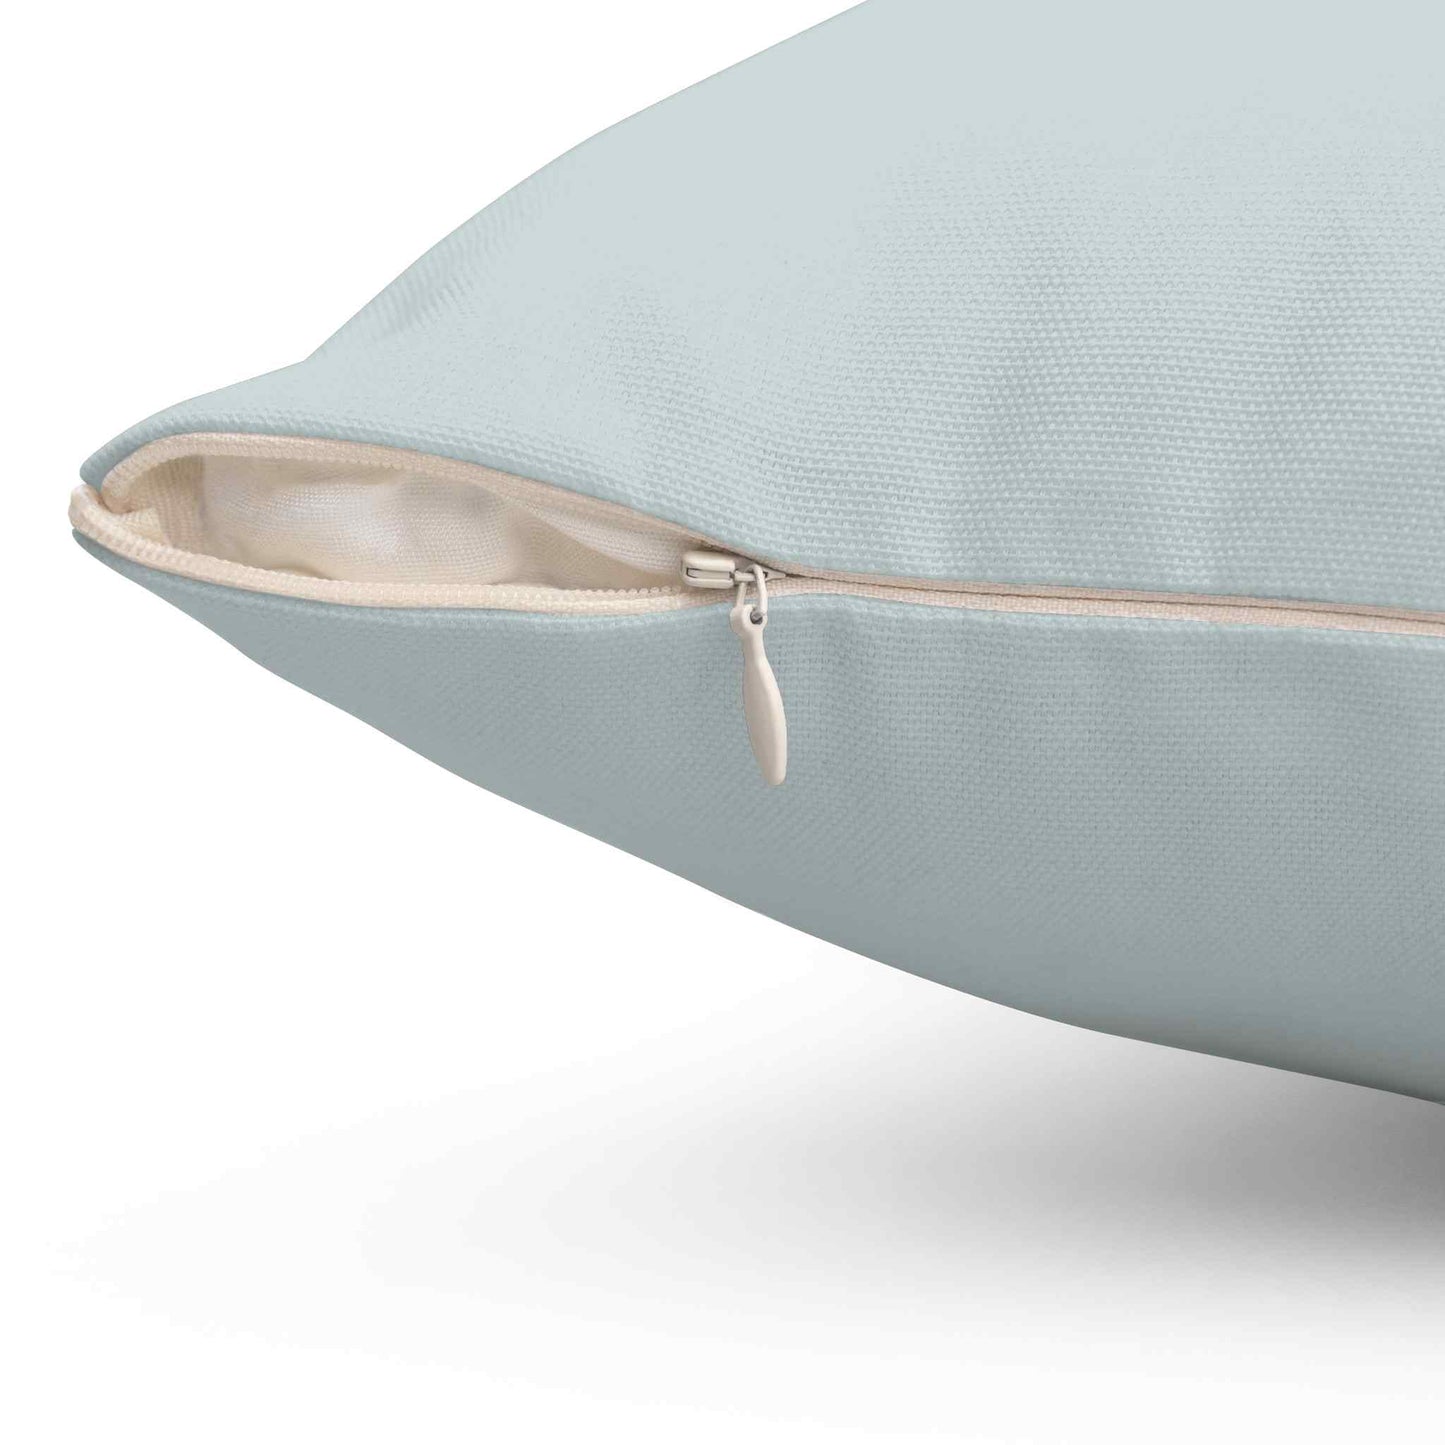 Teal Tenderness - All Shades of Love - Square Pillow & Cover